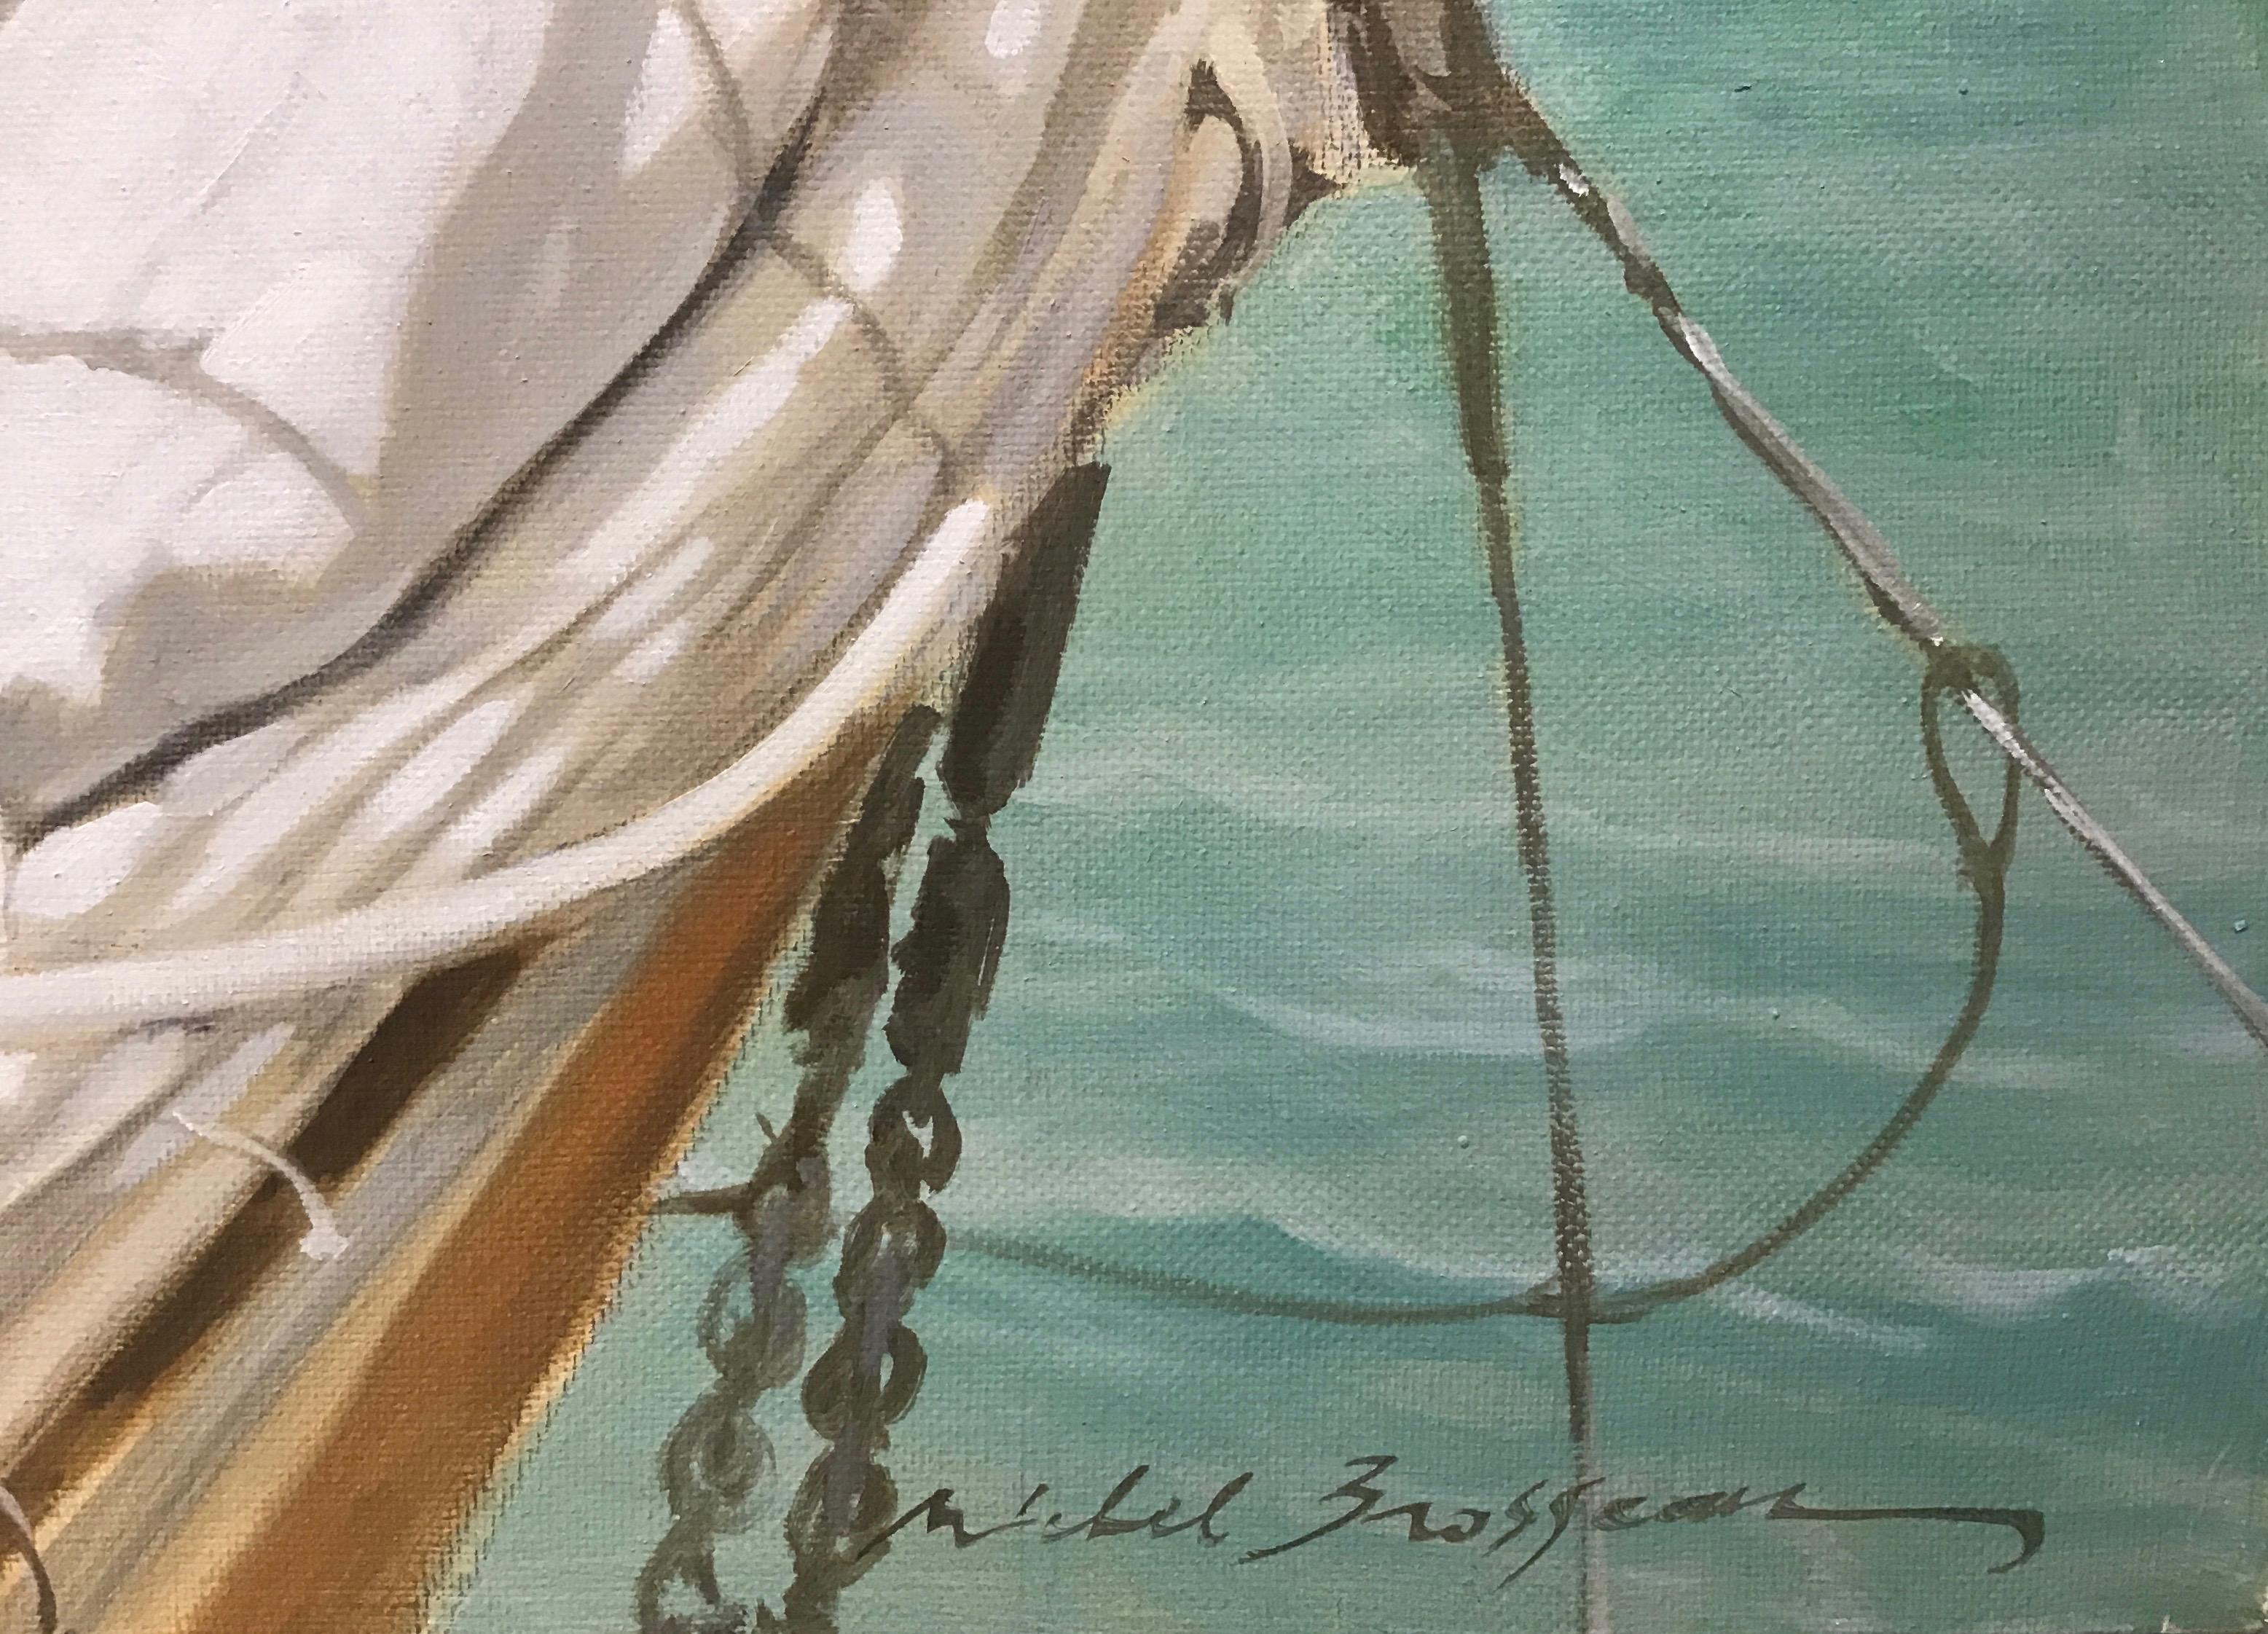 Oil painting of a ruched sail with green and blue ocean behind.

Michel Brosseau was born in Nantes and has lived in Bordeaux for many years. Both cities are on the Atlantic coast of France and have rich maritime histories, highlighted by prosperous